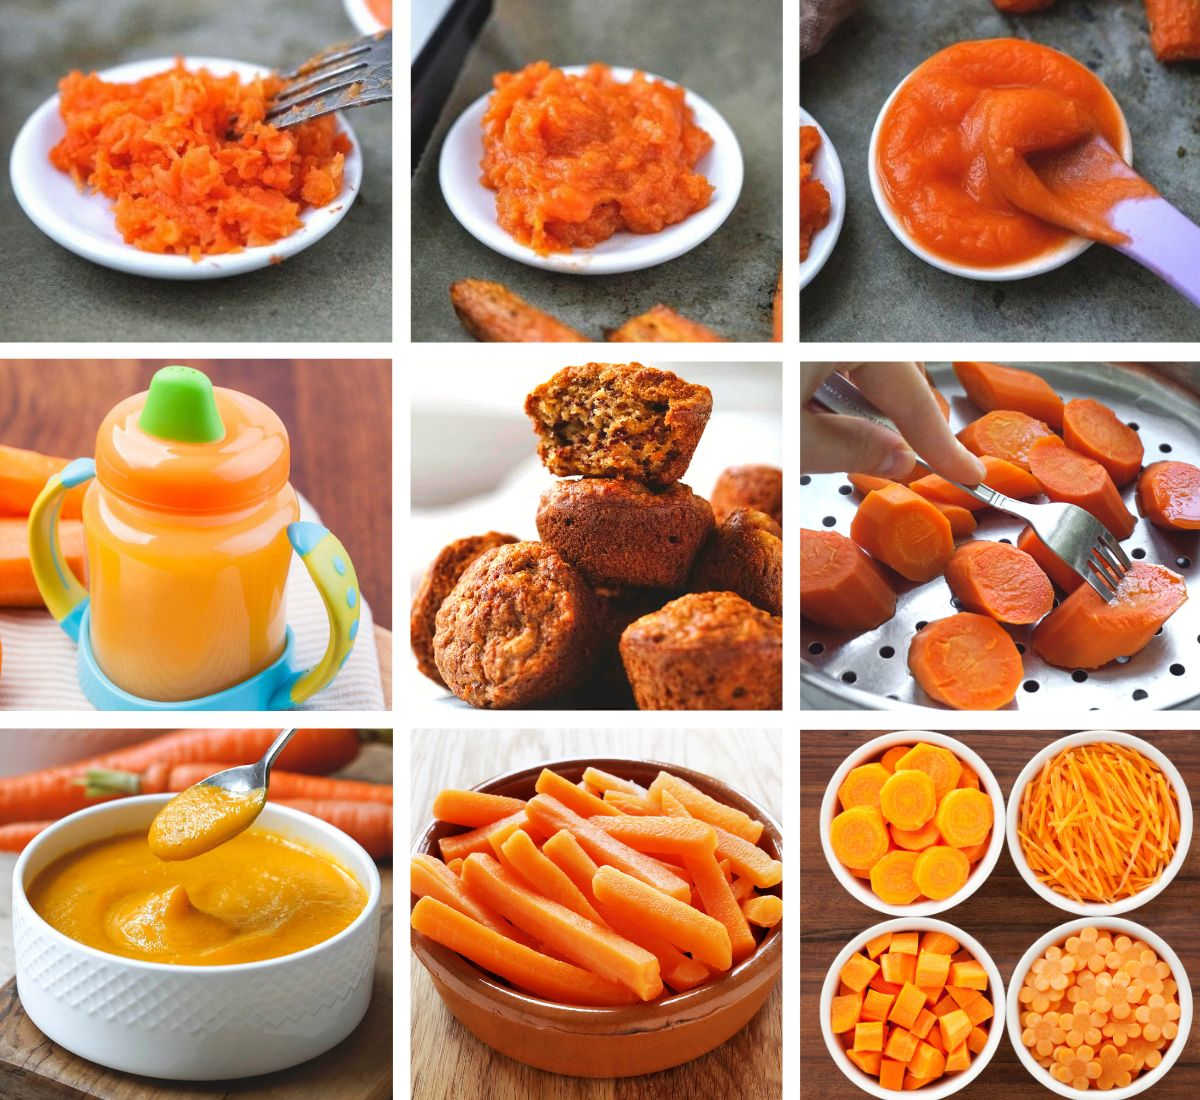 https://thrivingnest.com/wp-content/uploads/2021/12/carrot-for-babies-how-to-cook-prepare.jpg